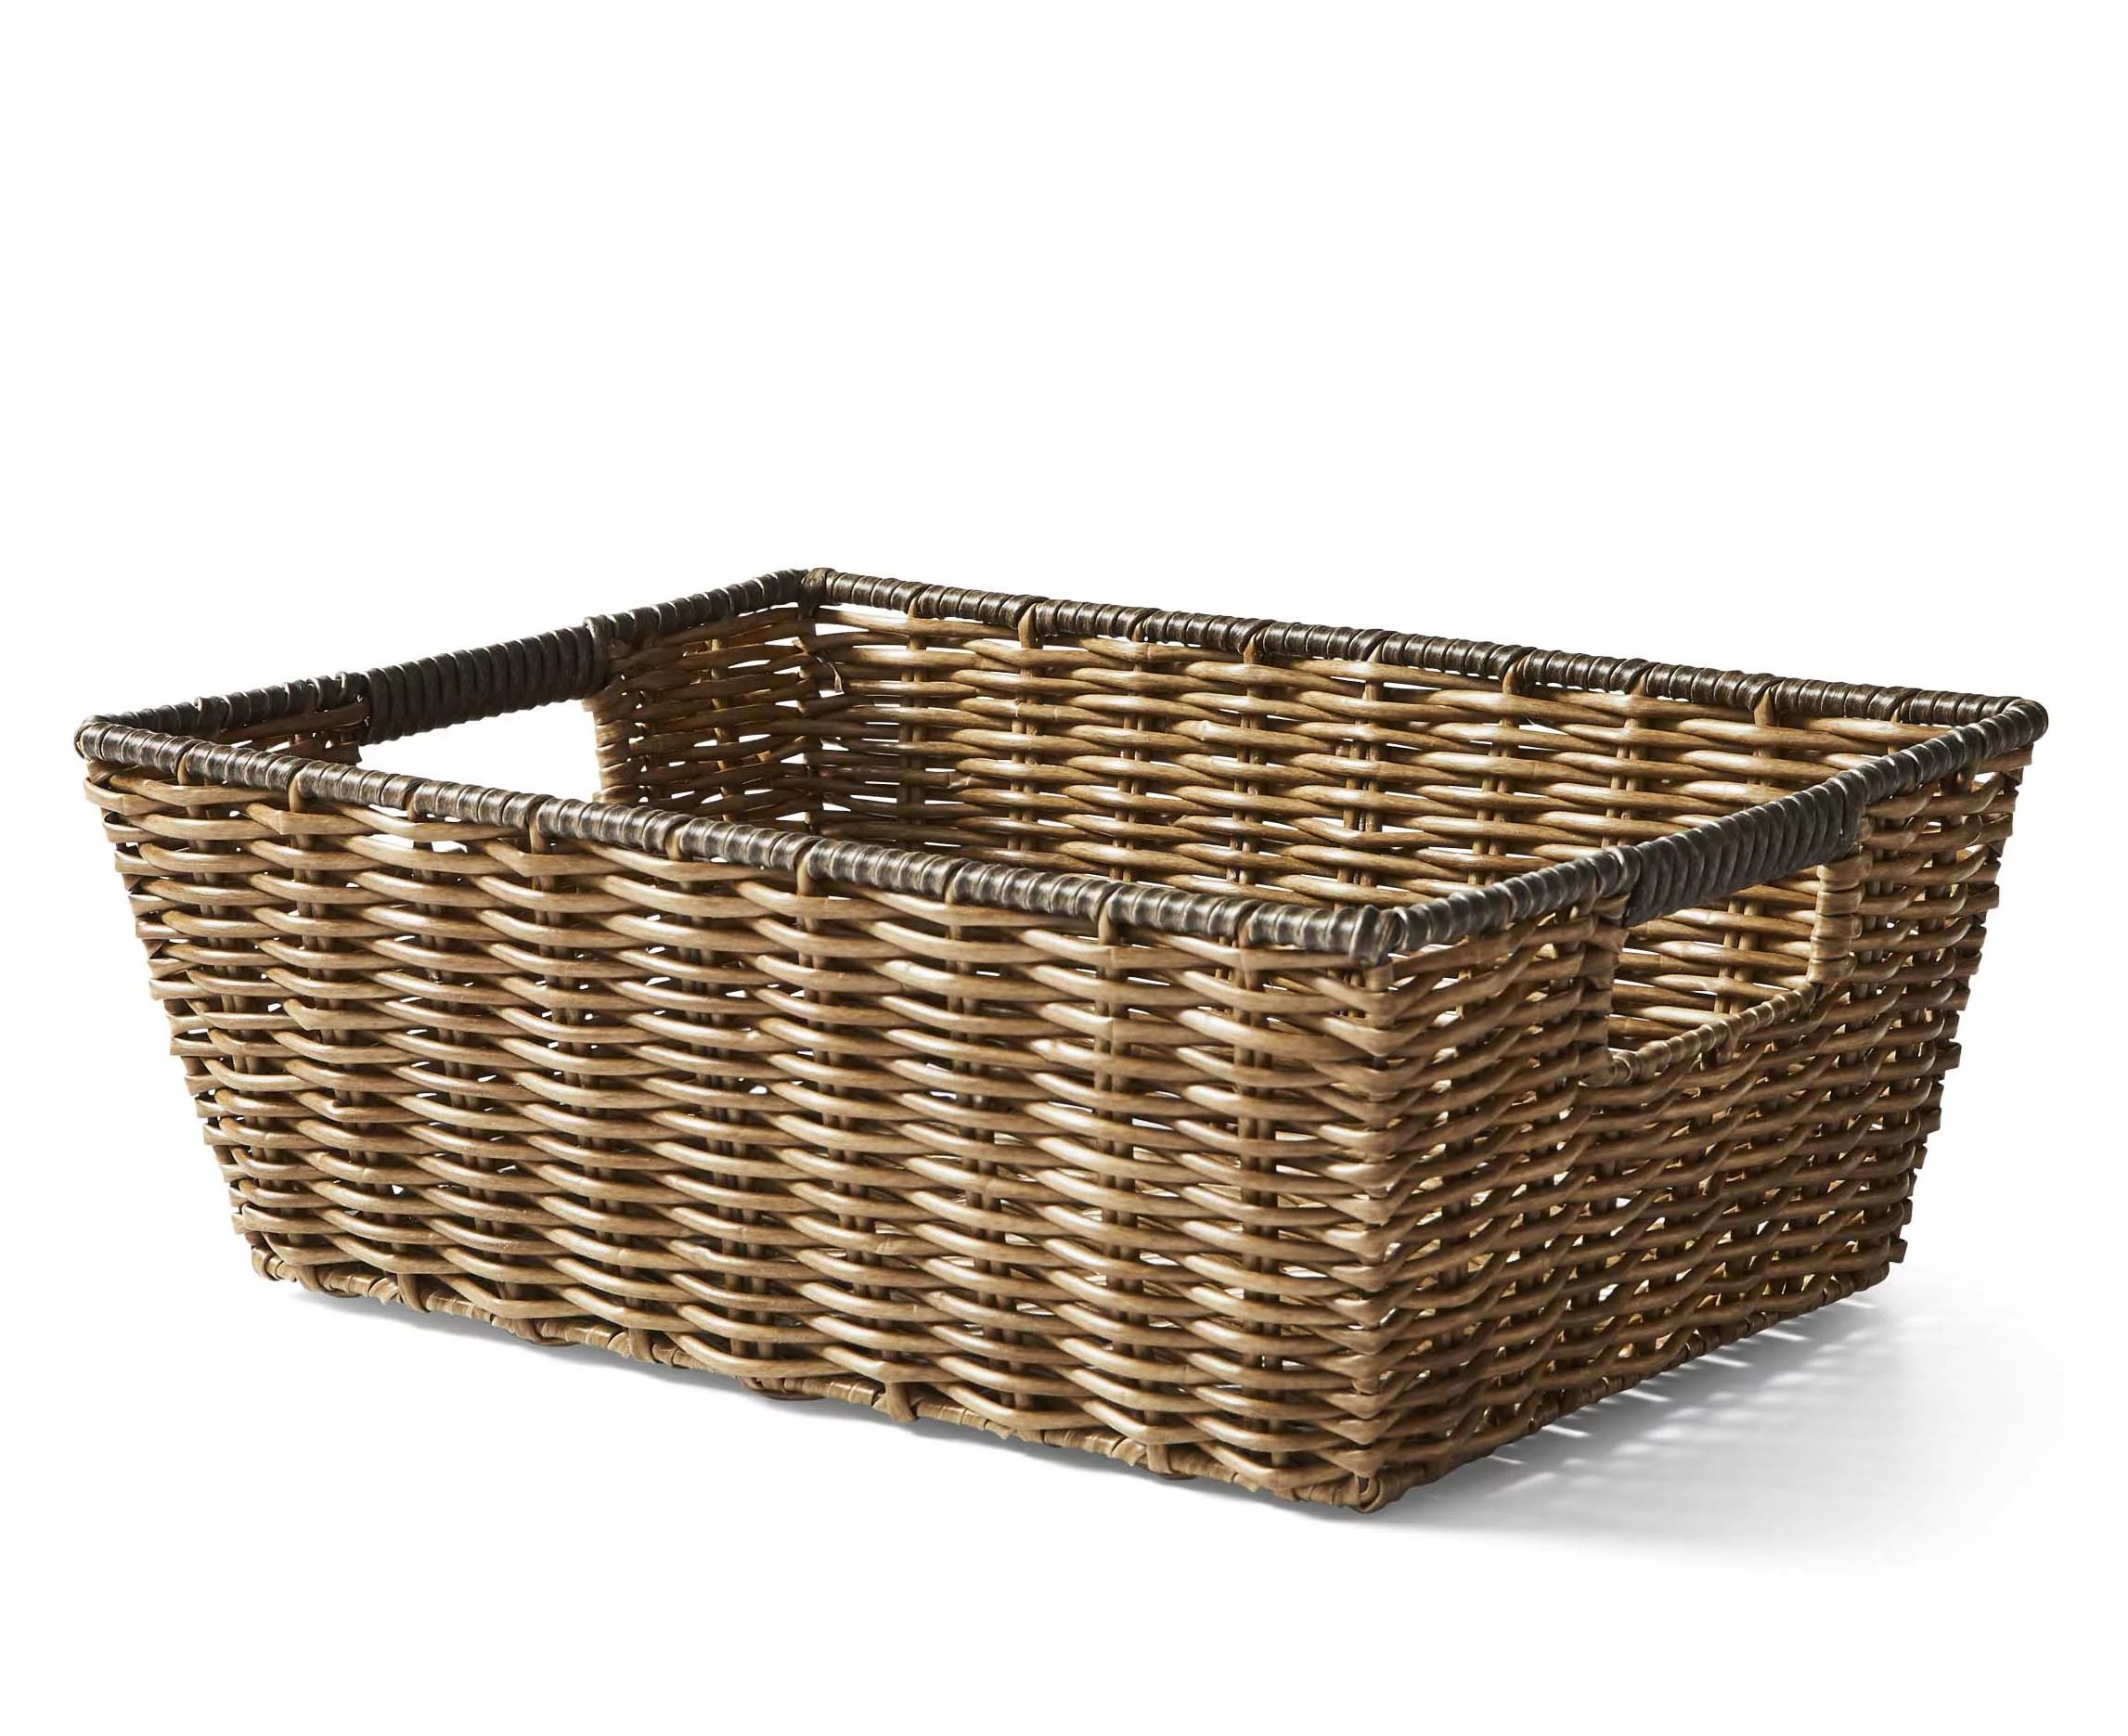 The Better Homes & Gardens Poly Rattan Storage Basket with Cut-Out Handles | Walmart (US)